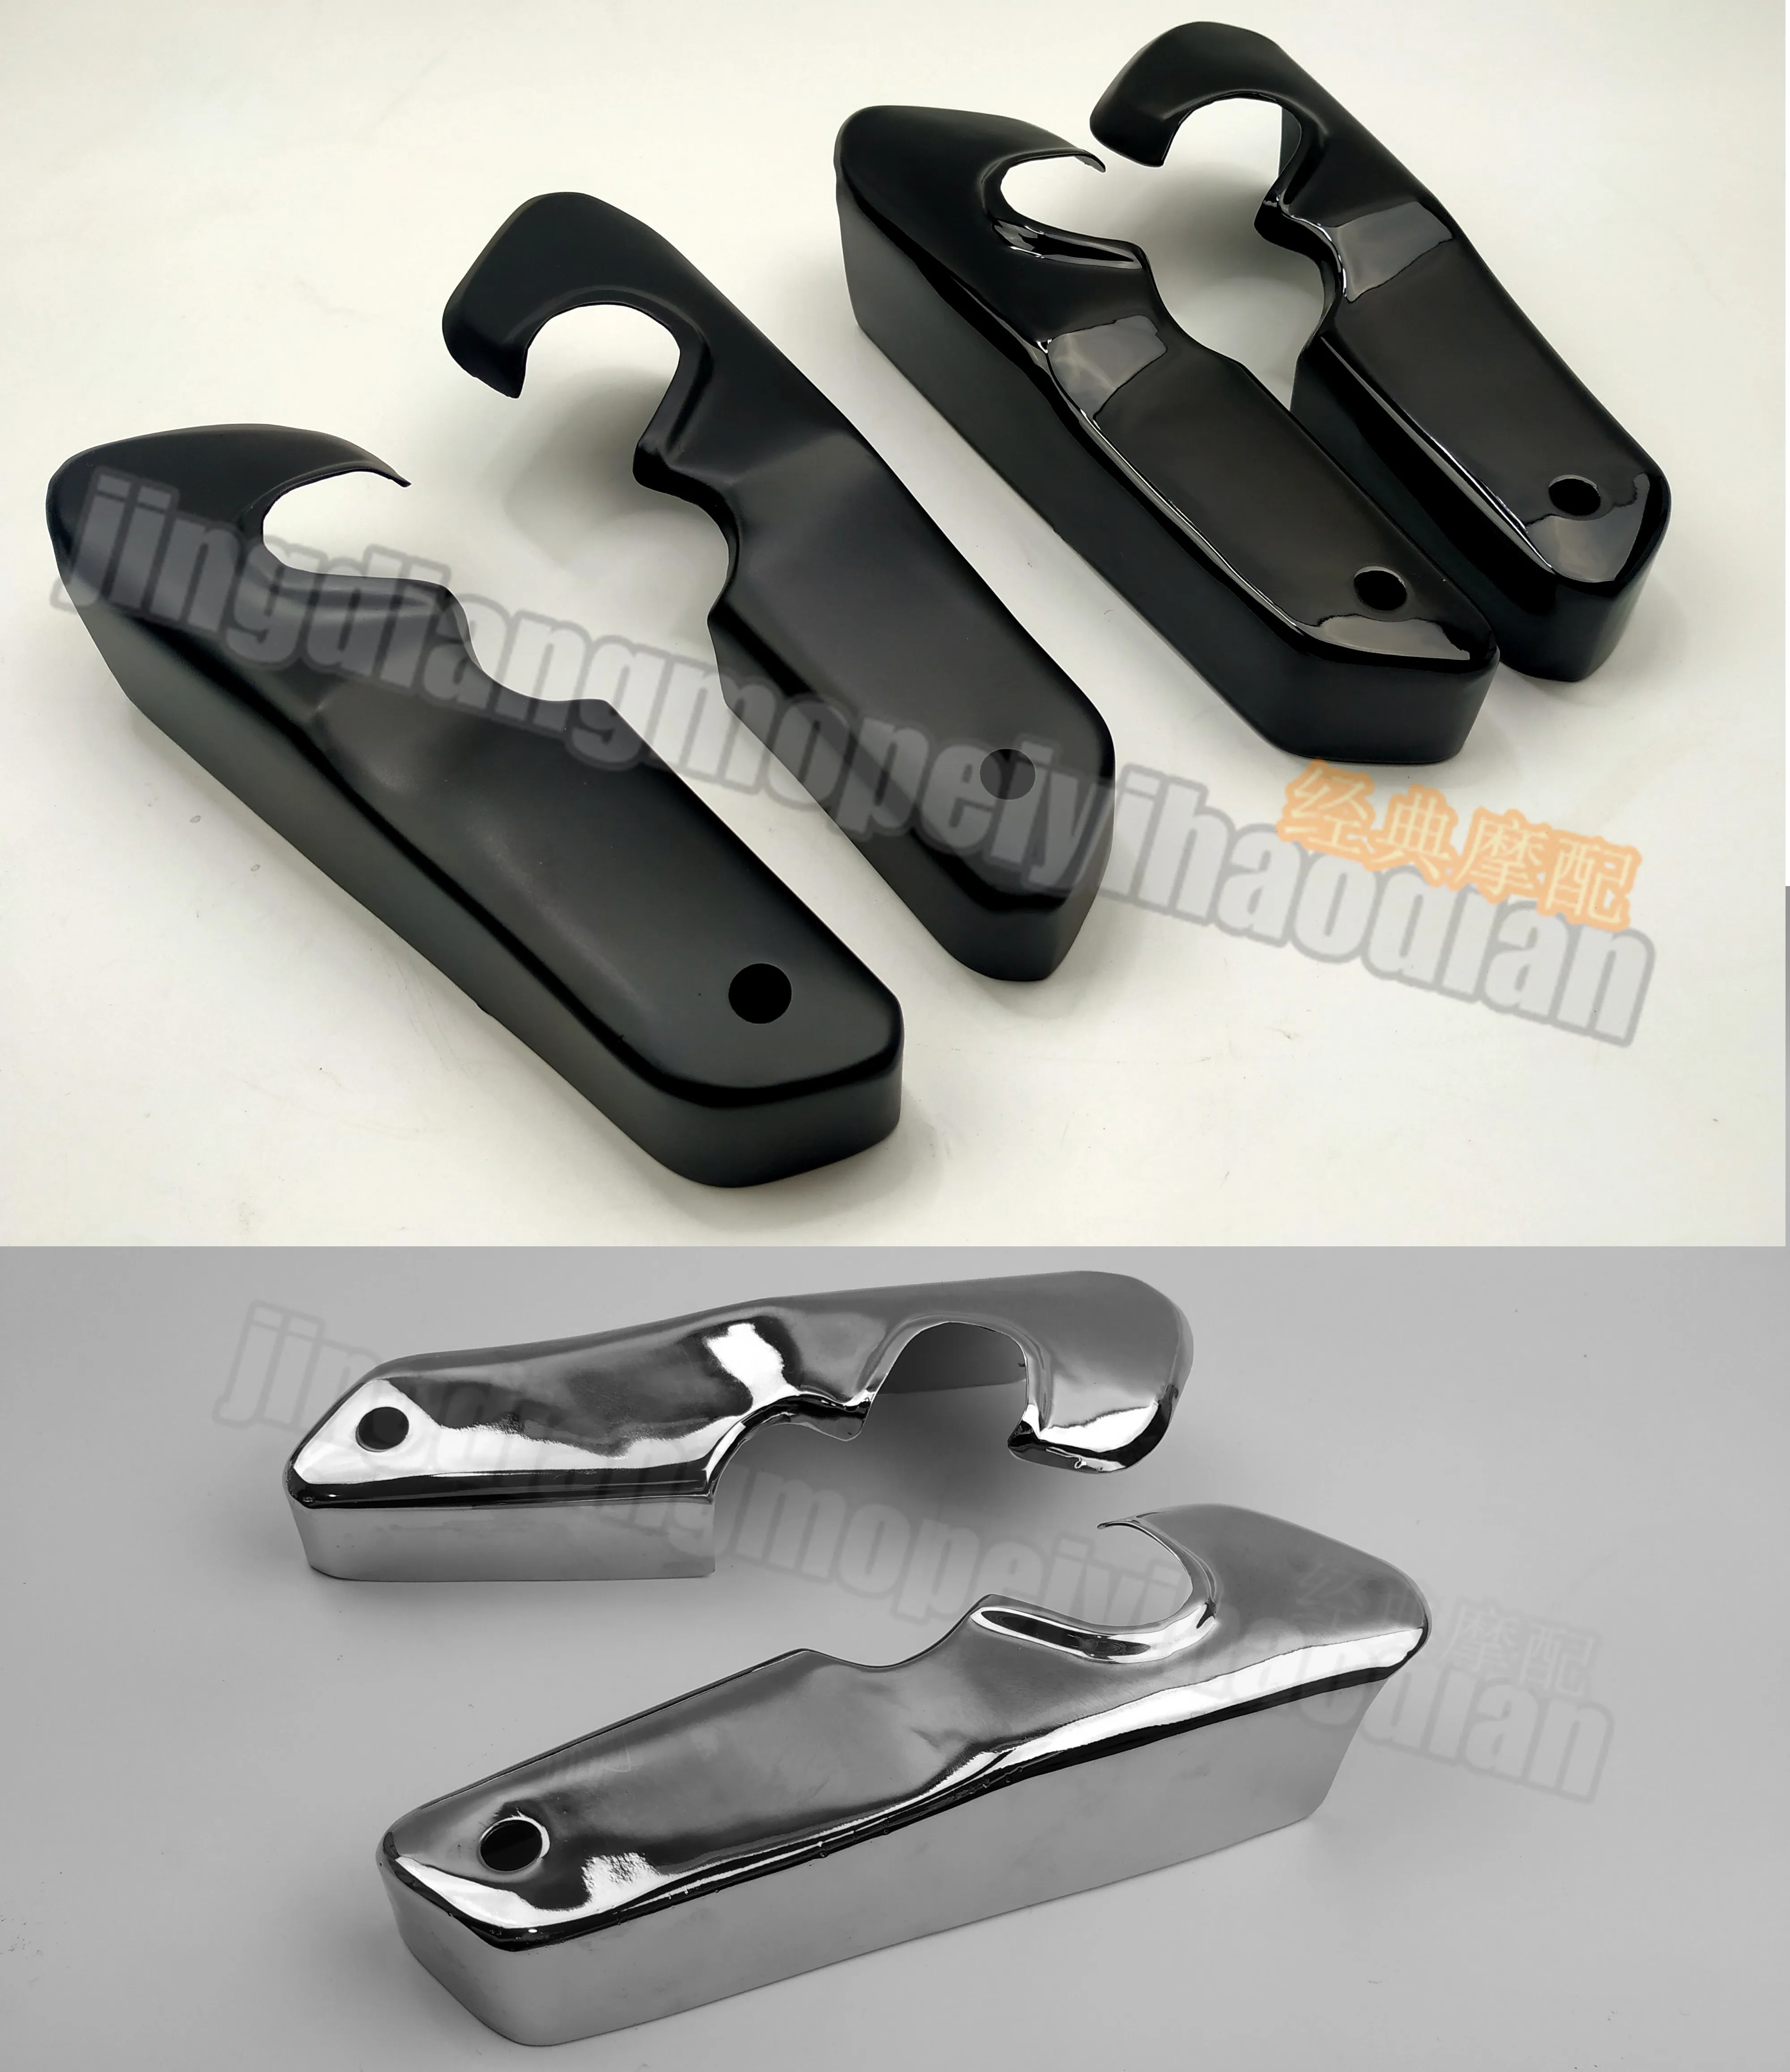 

Rear Fender Mudguard Support Bracket for Harley Davidson Sportsters Iron XL 883 1200 48 72 Forty-Eight Seventy-Two Roadster